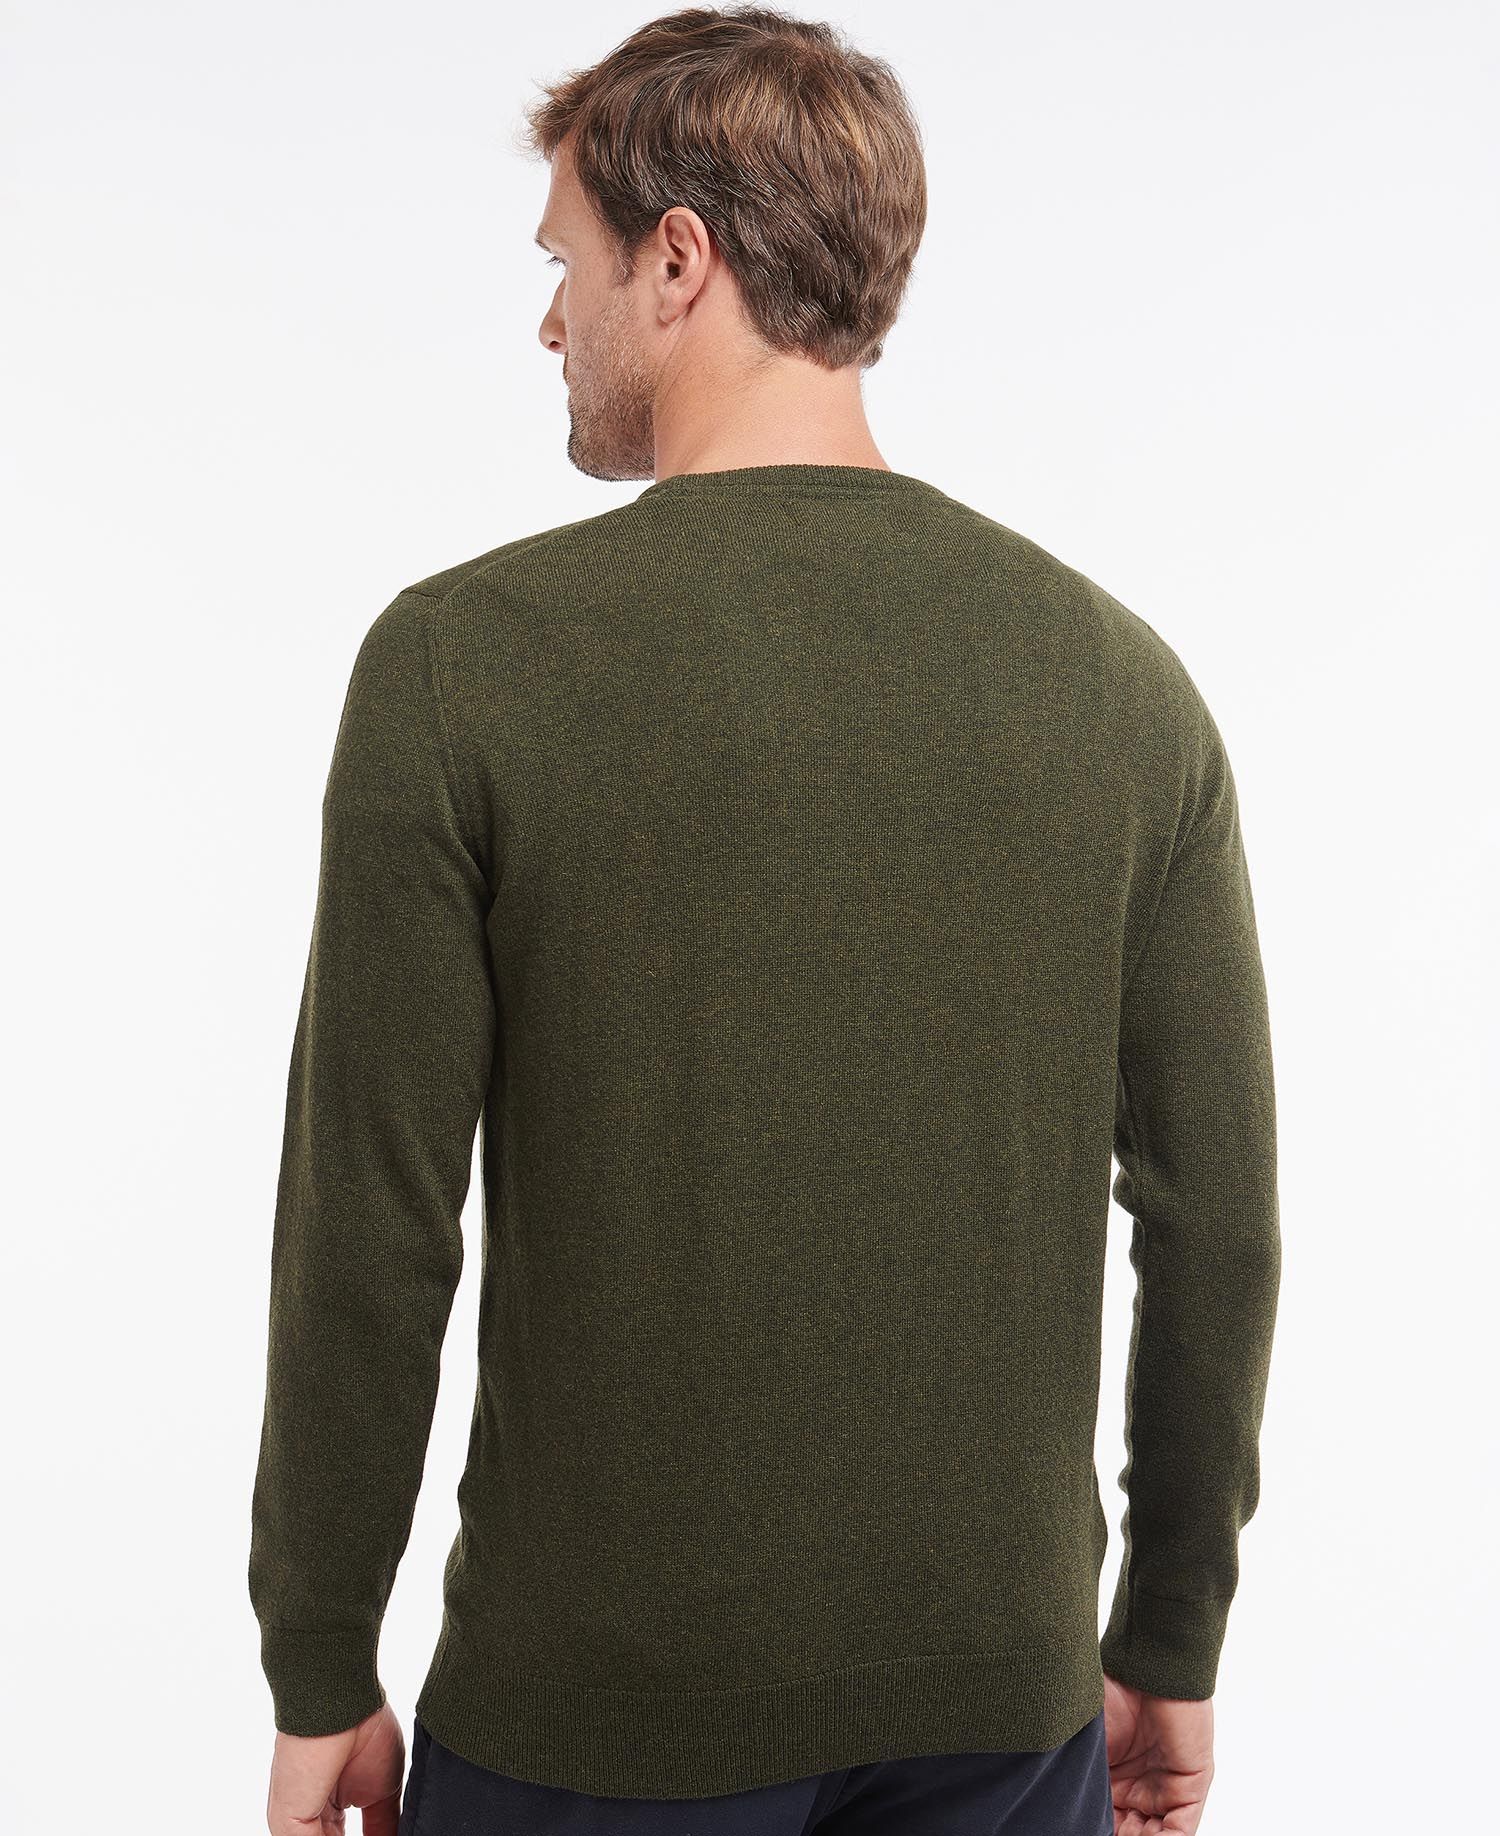 BARBOUR Maglione Uomo Essential Lambswool Crew MKN0345 Seaweed